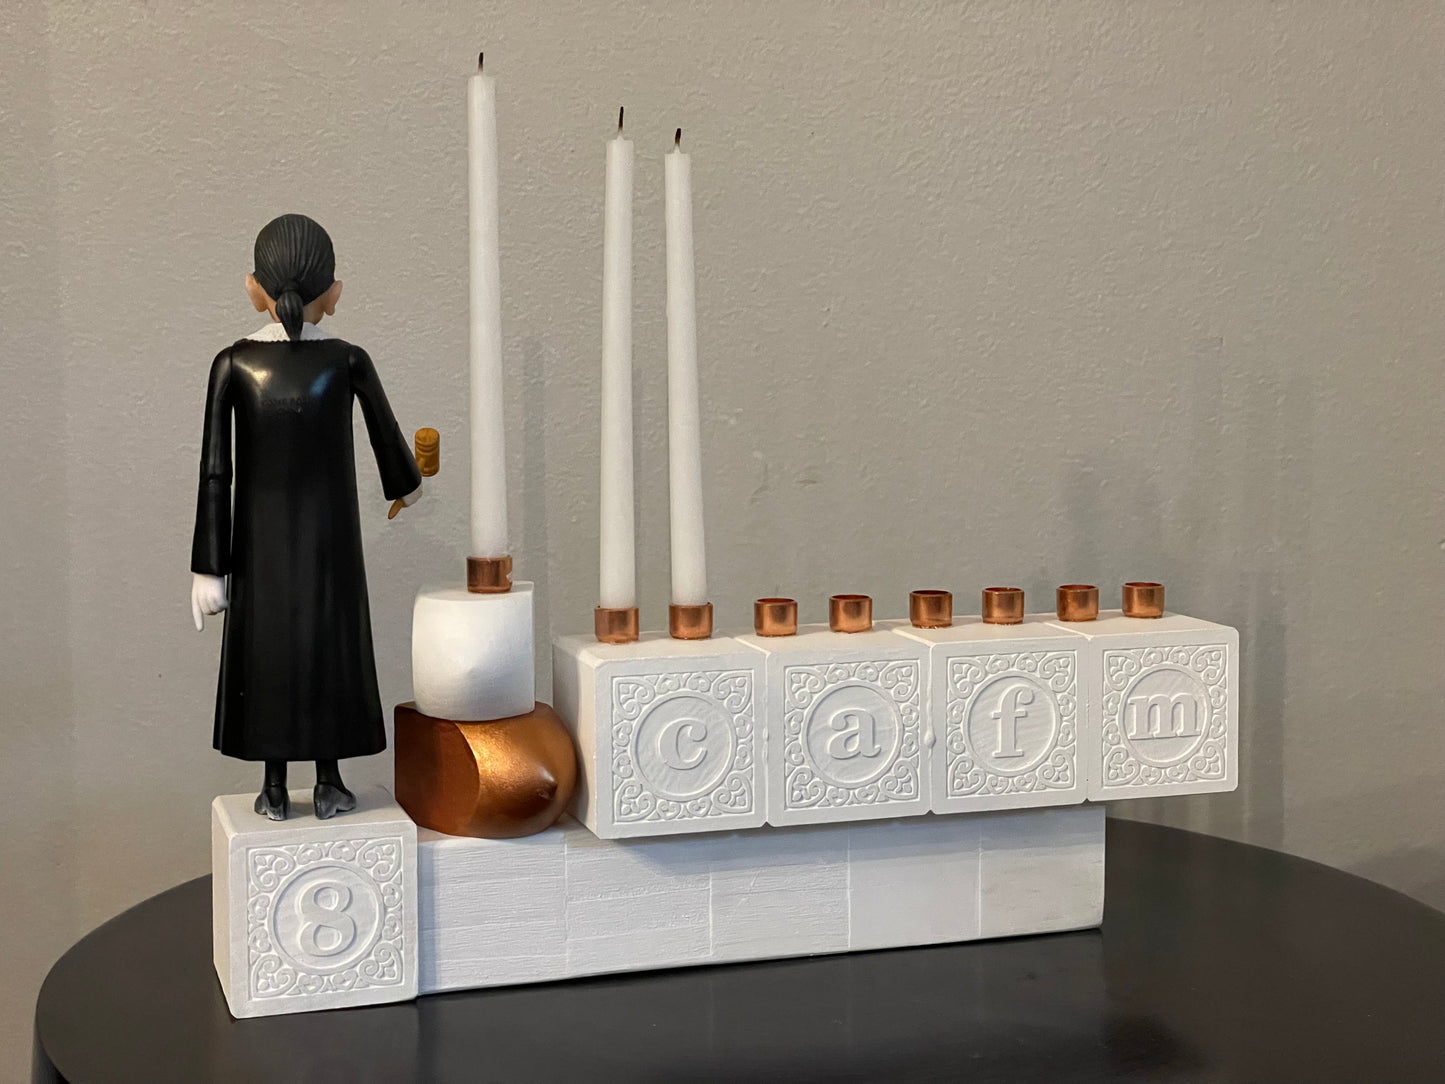 RBG Menorah – “When There Are Nine”